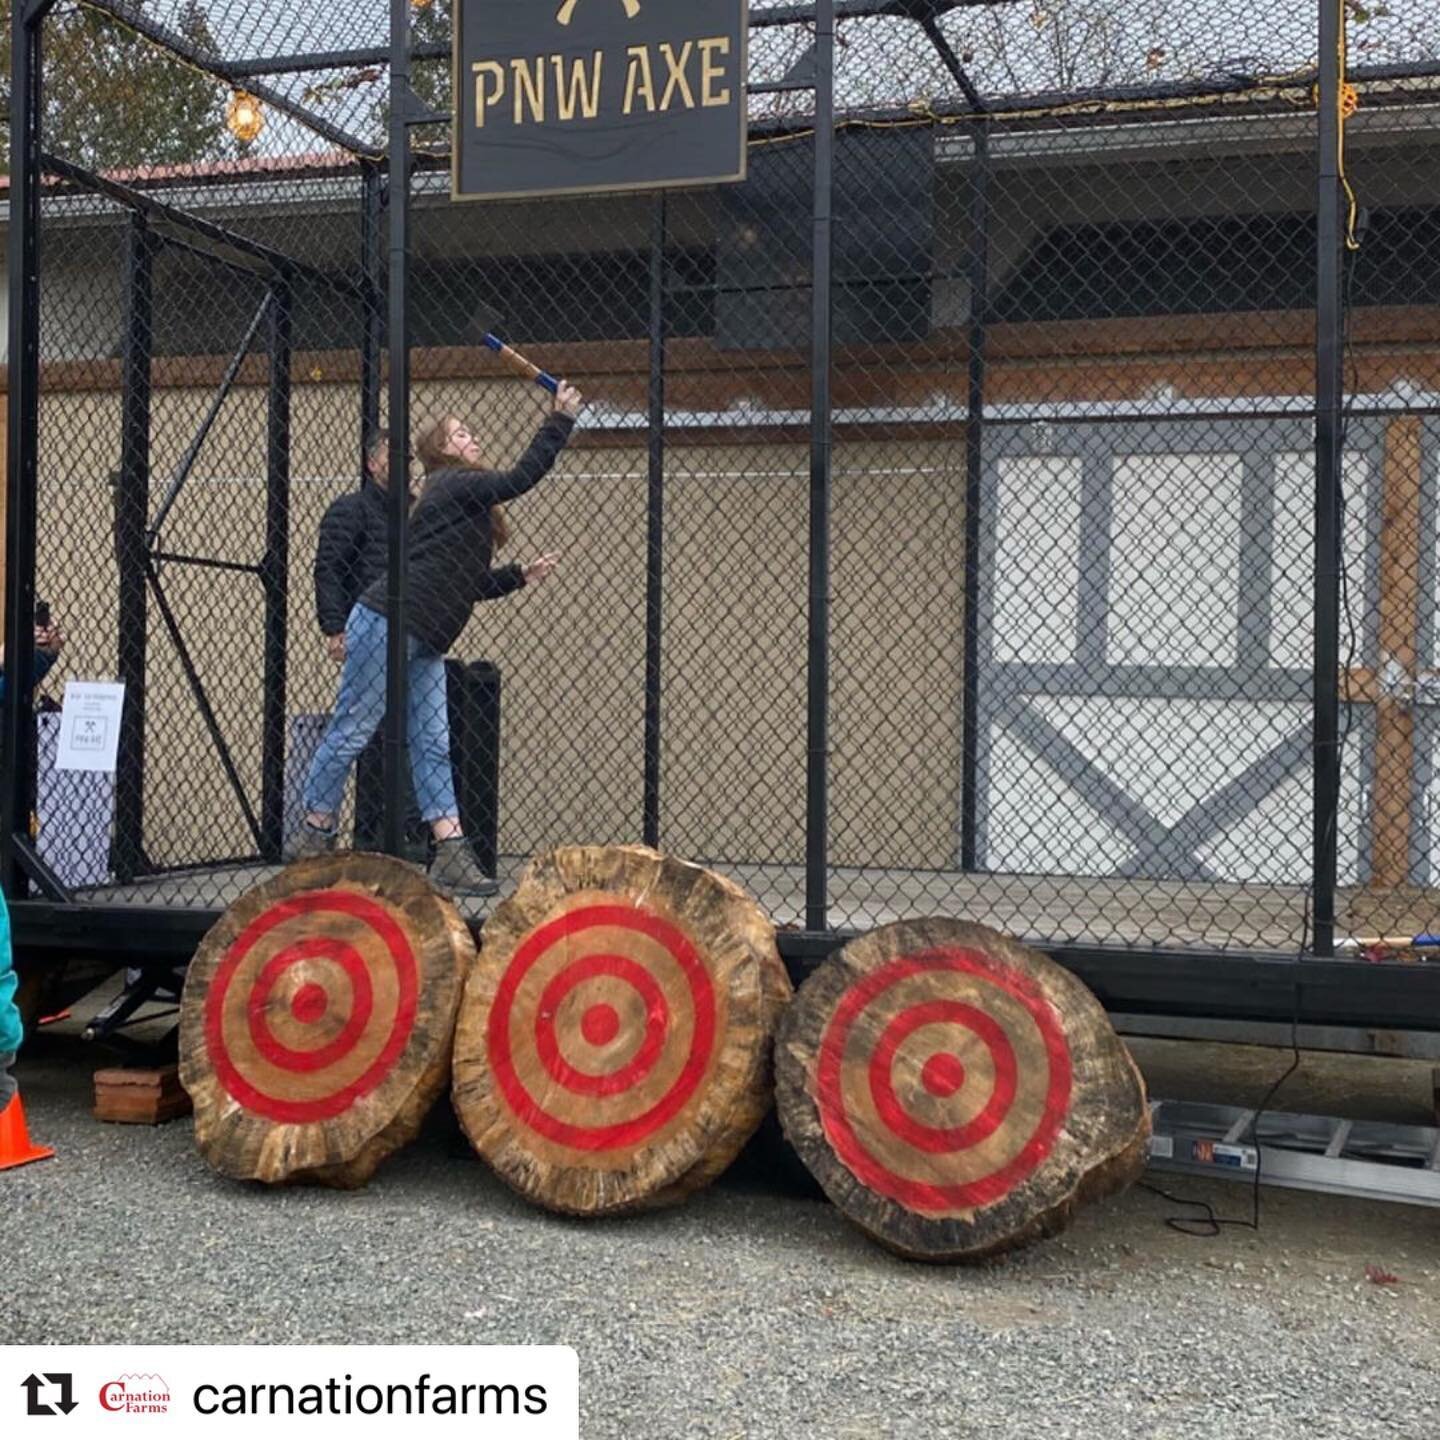 #Repost @carnationfarms with @make_repost ・・・
Glad to back this weekend! Even though this weekend&rsquo;s  forecast calls for rain, Harvest Festival at Carnation Farms will run 10-4 Saturday and Sunday. If you&rsquo;re looking for pumpkins and fun on